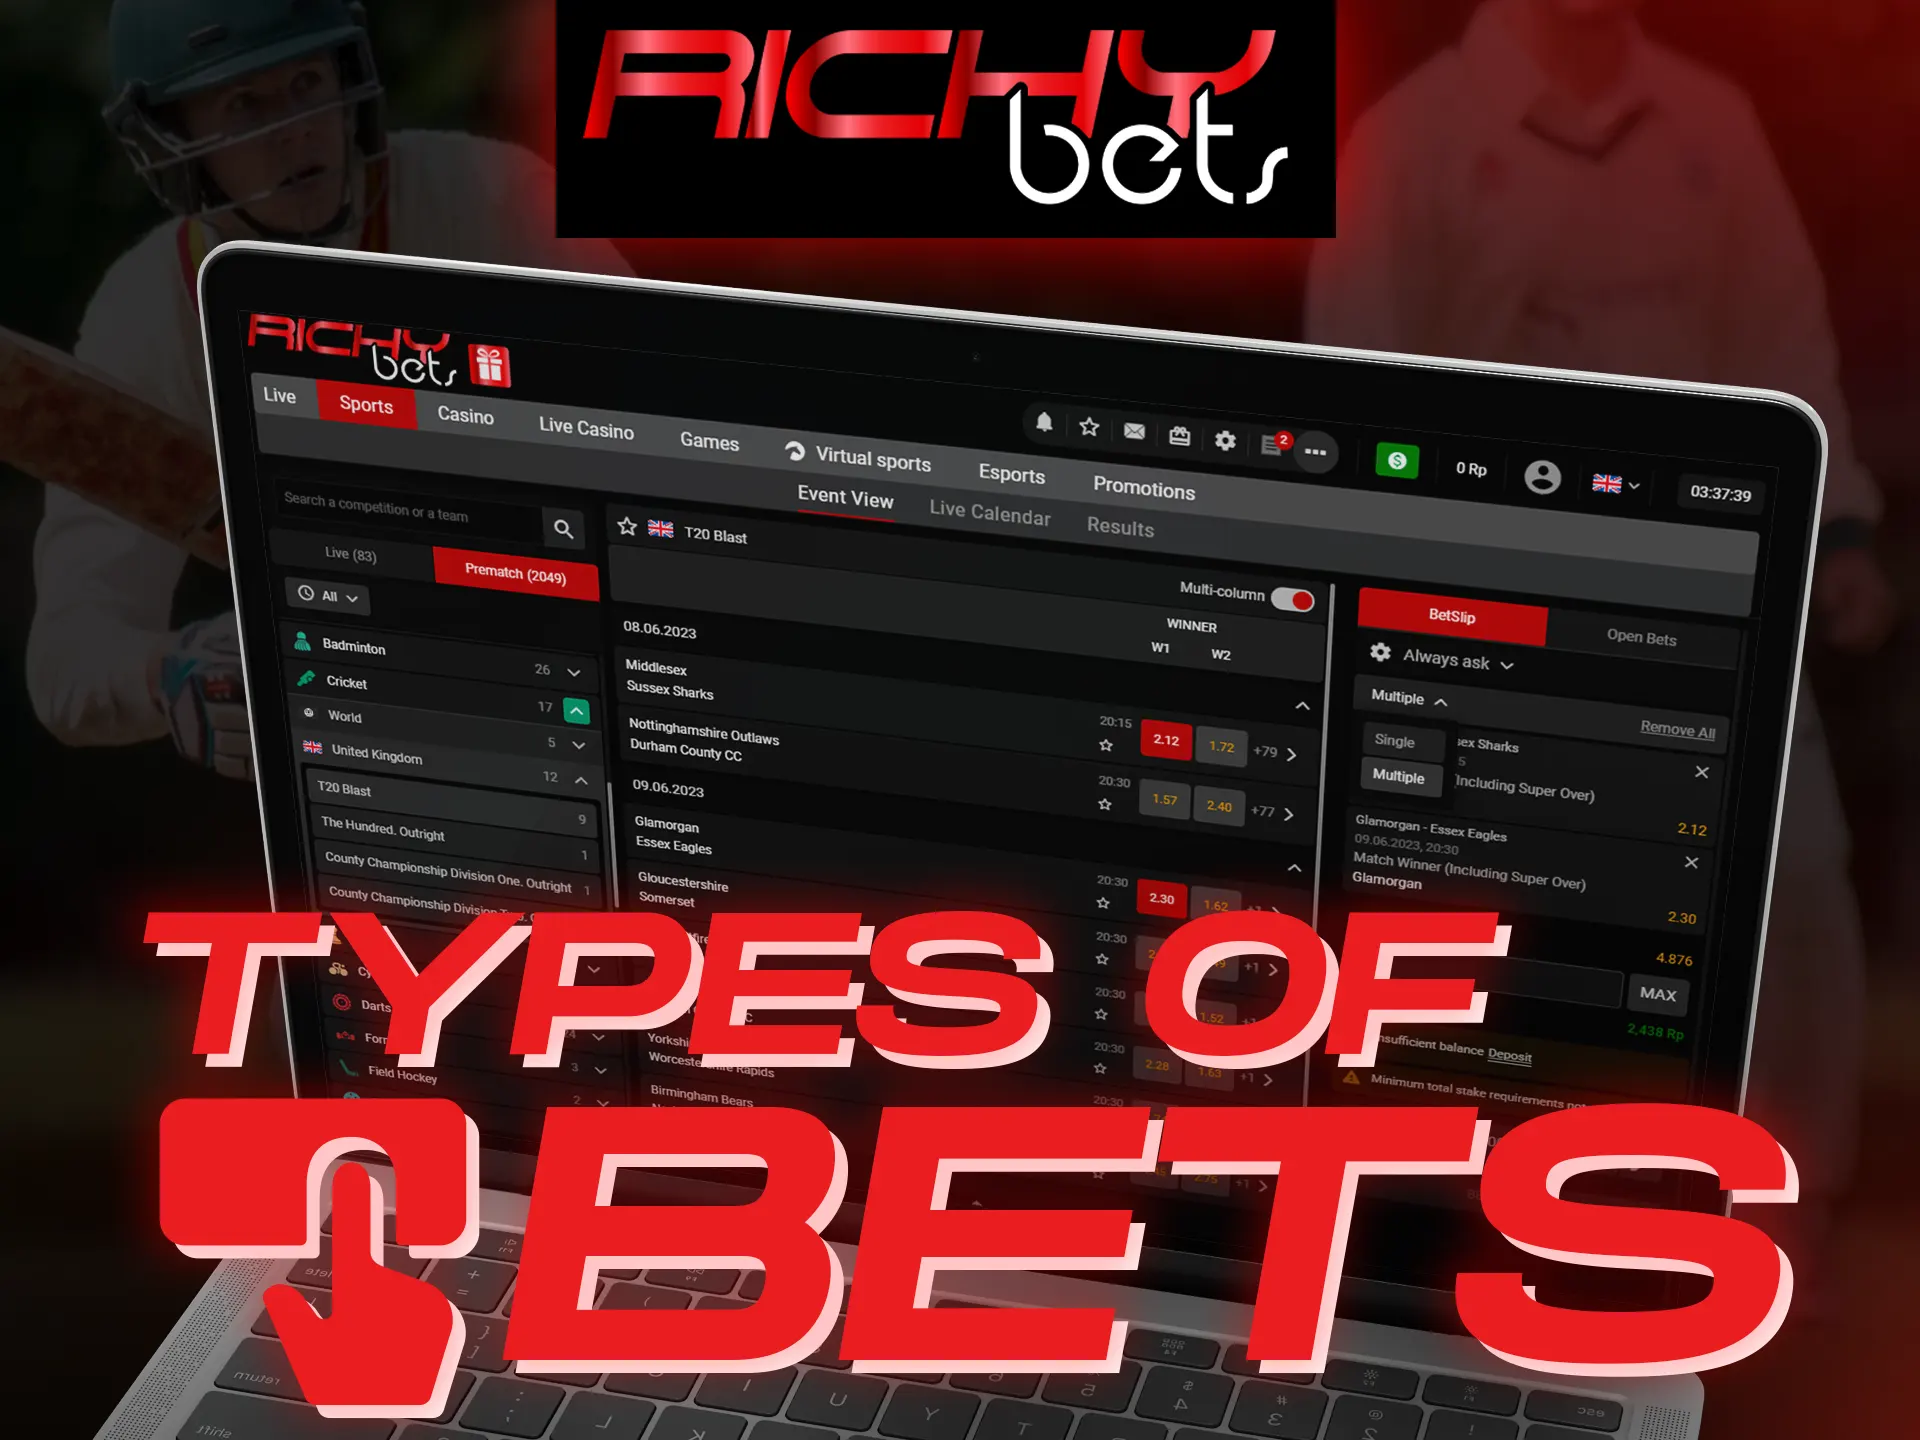 Try different types of bets when making new bets at the Richybets.